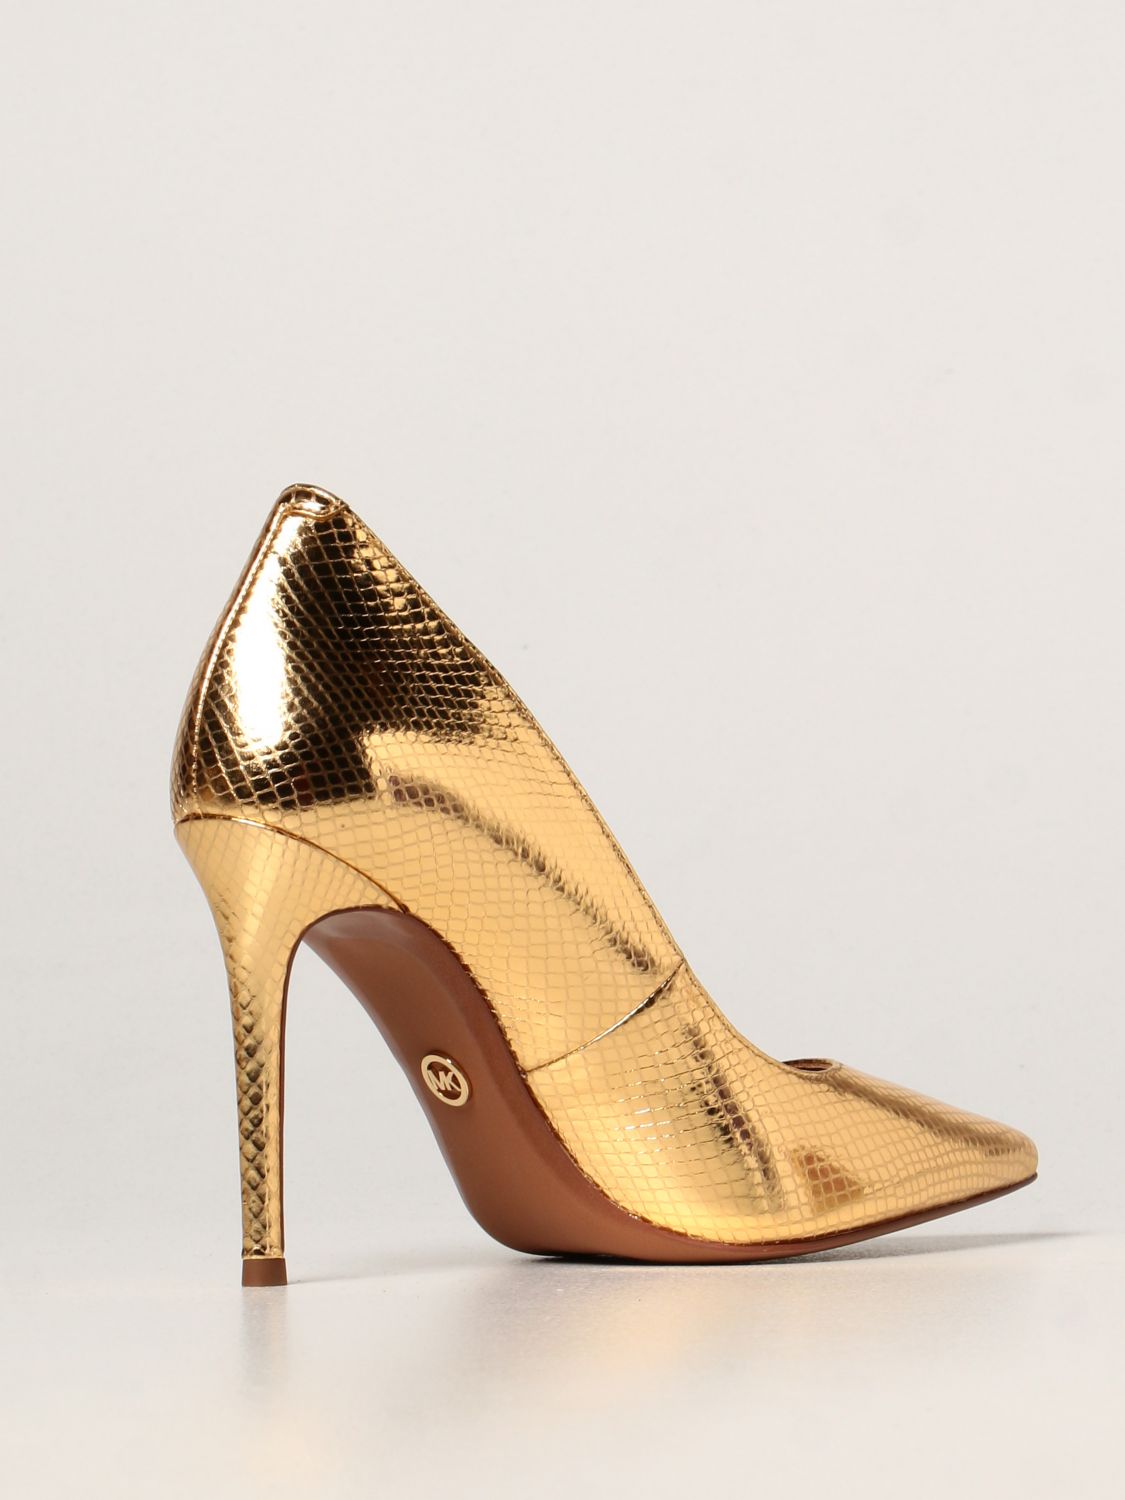 Scared to die Contribution Proportional MICHAEL KORS: Keke Michael pumps in laminated leather - Gold | Pumps  Michael Kors 40T1KEHP1M GIGLIO.COM